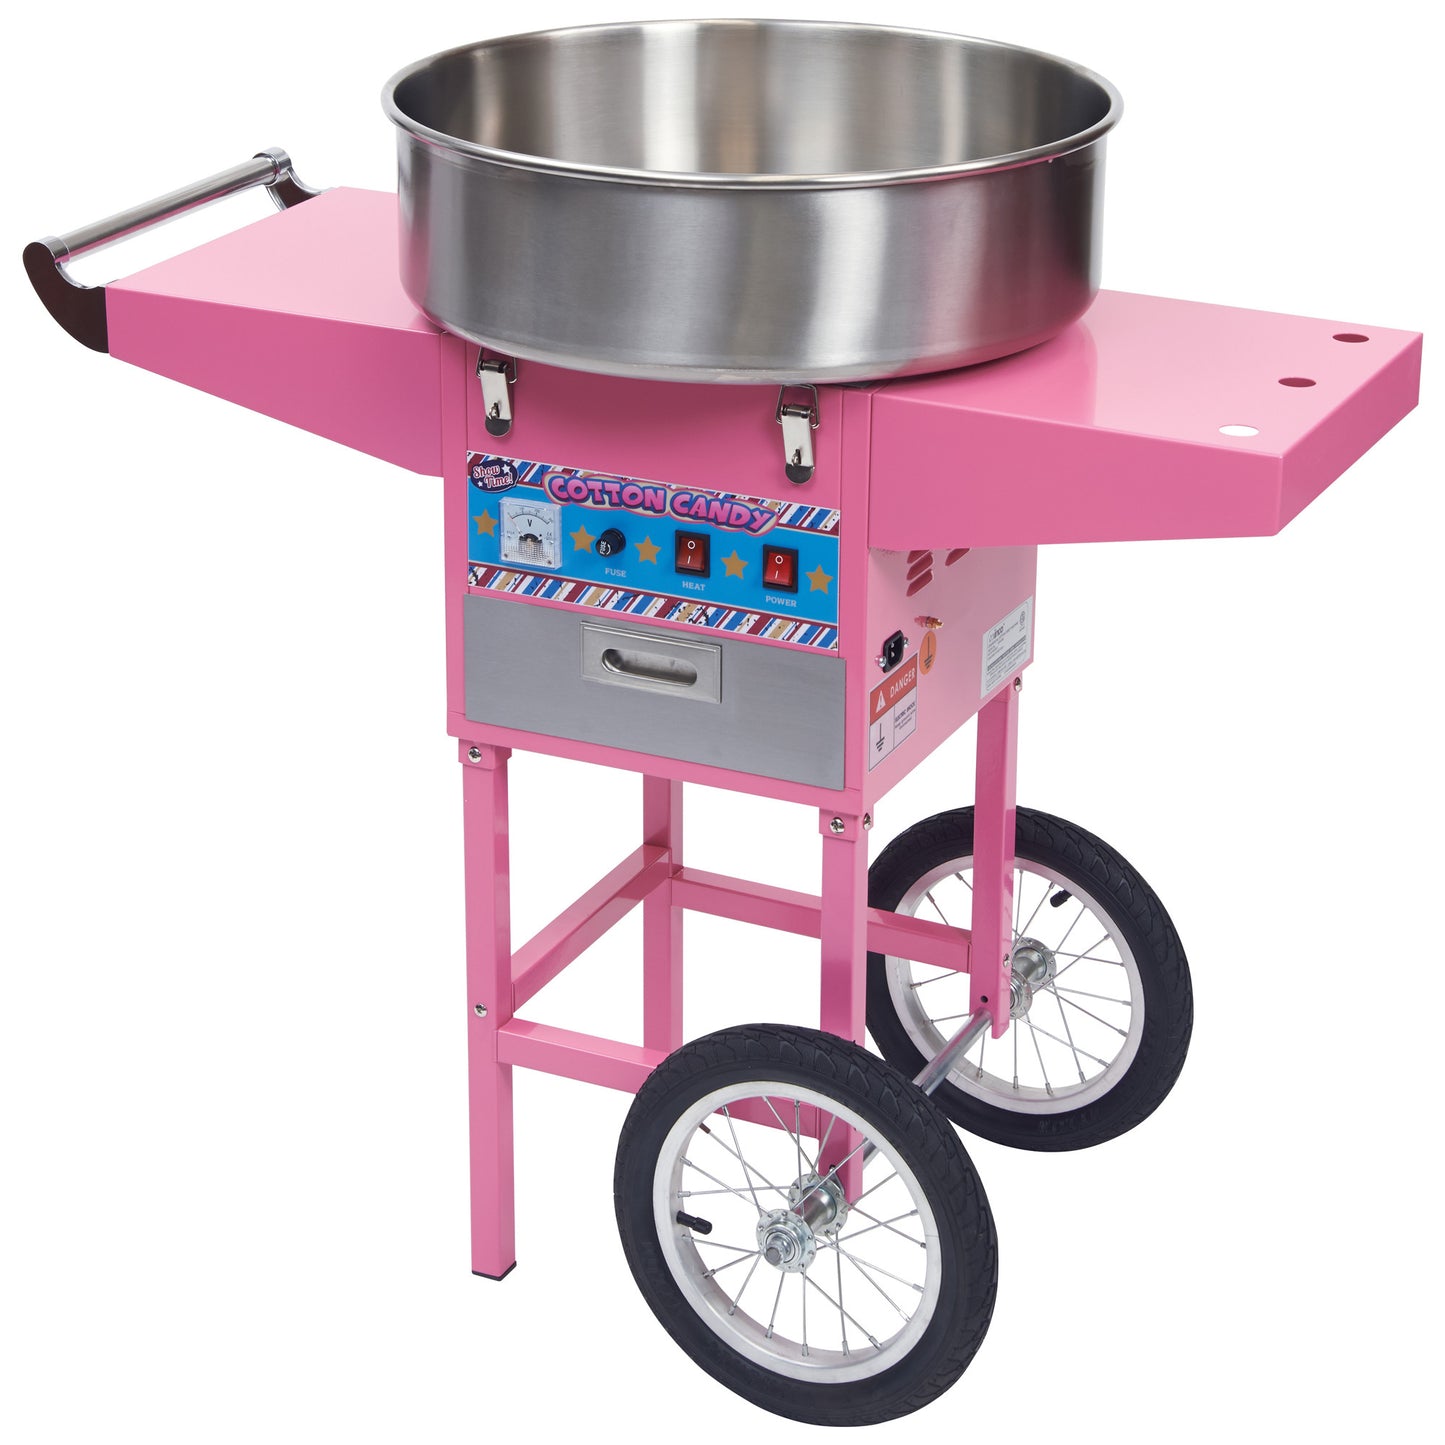 CCM-28M - ShowTime! Cotton Candy Machine with Cart, 1080W